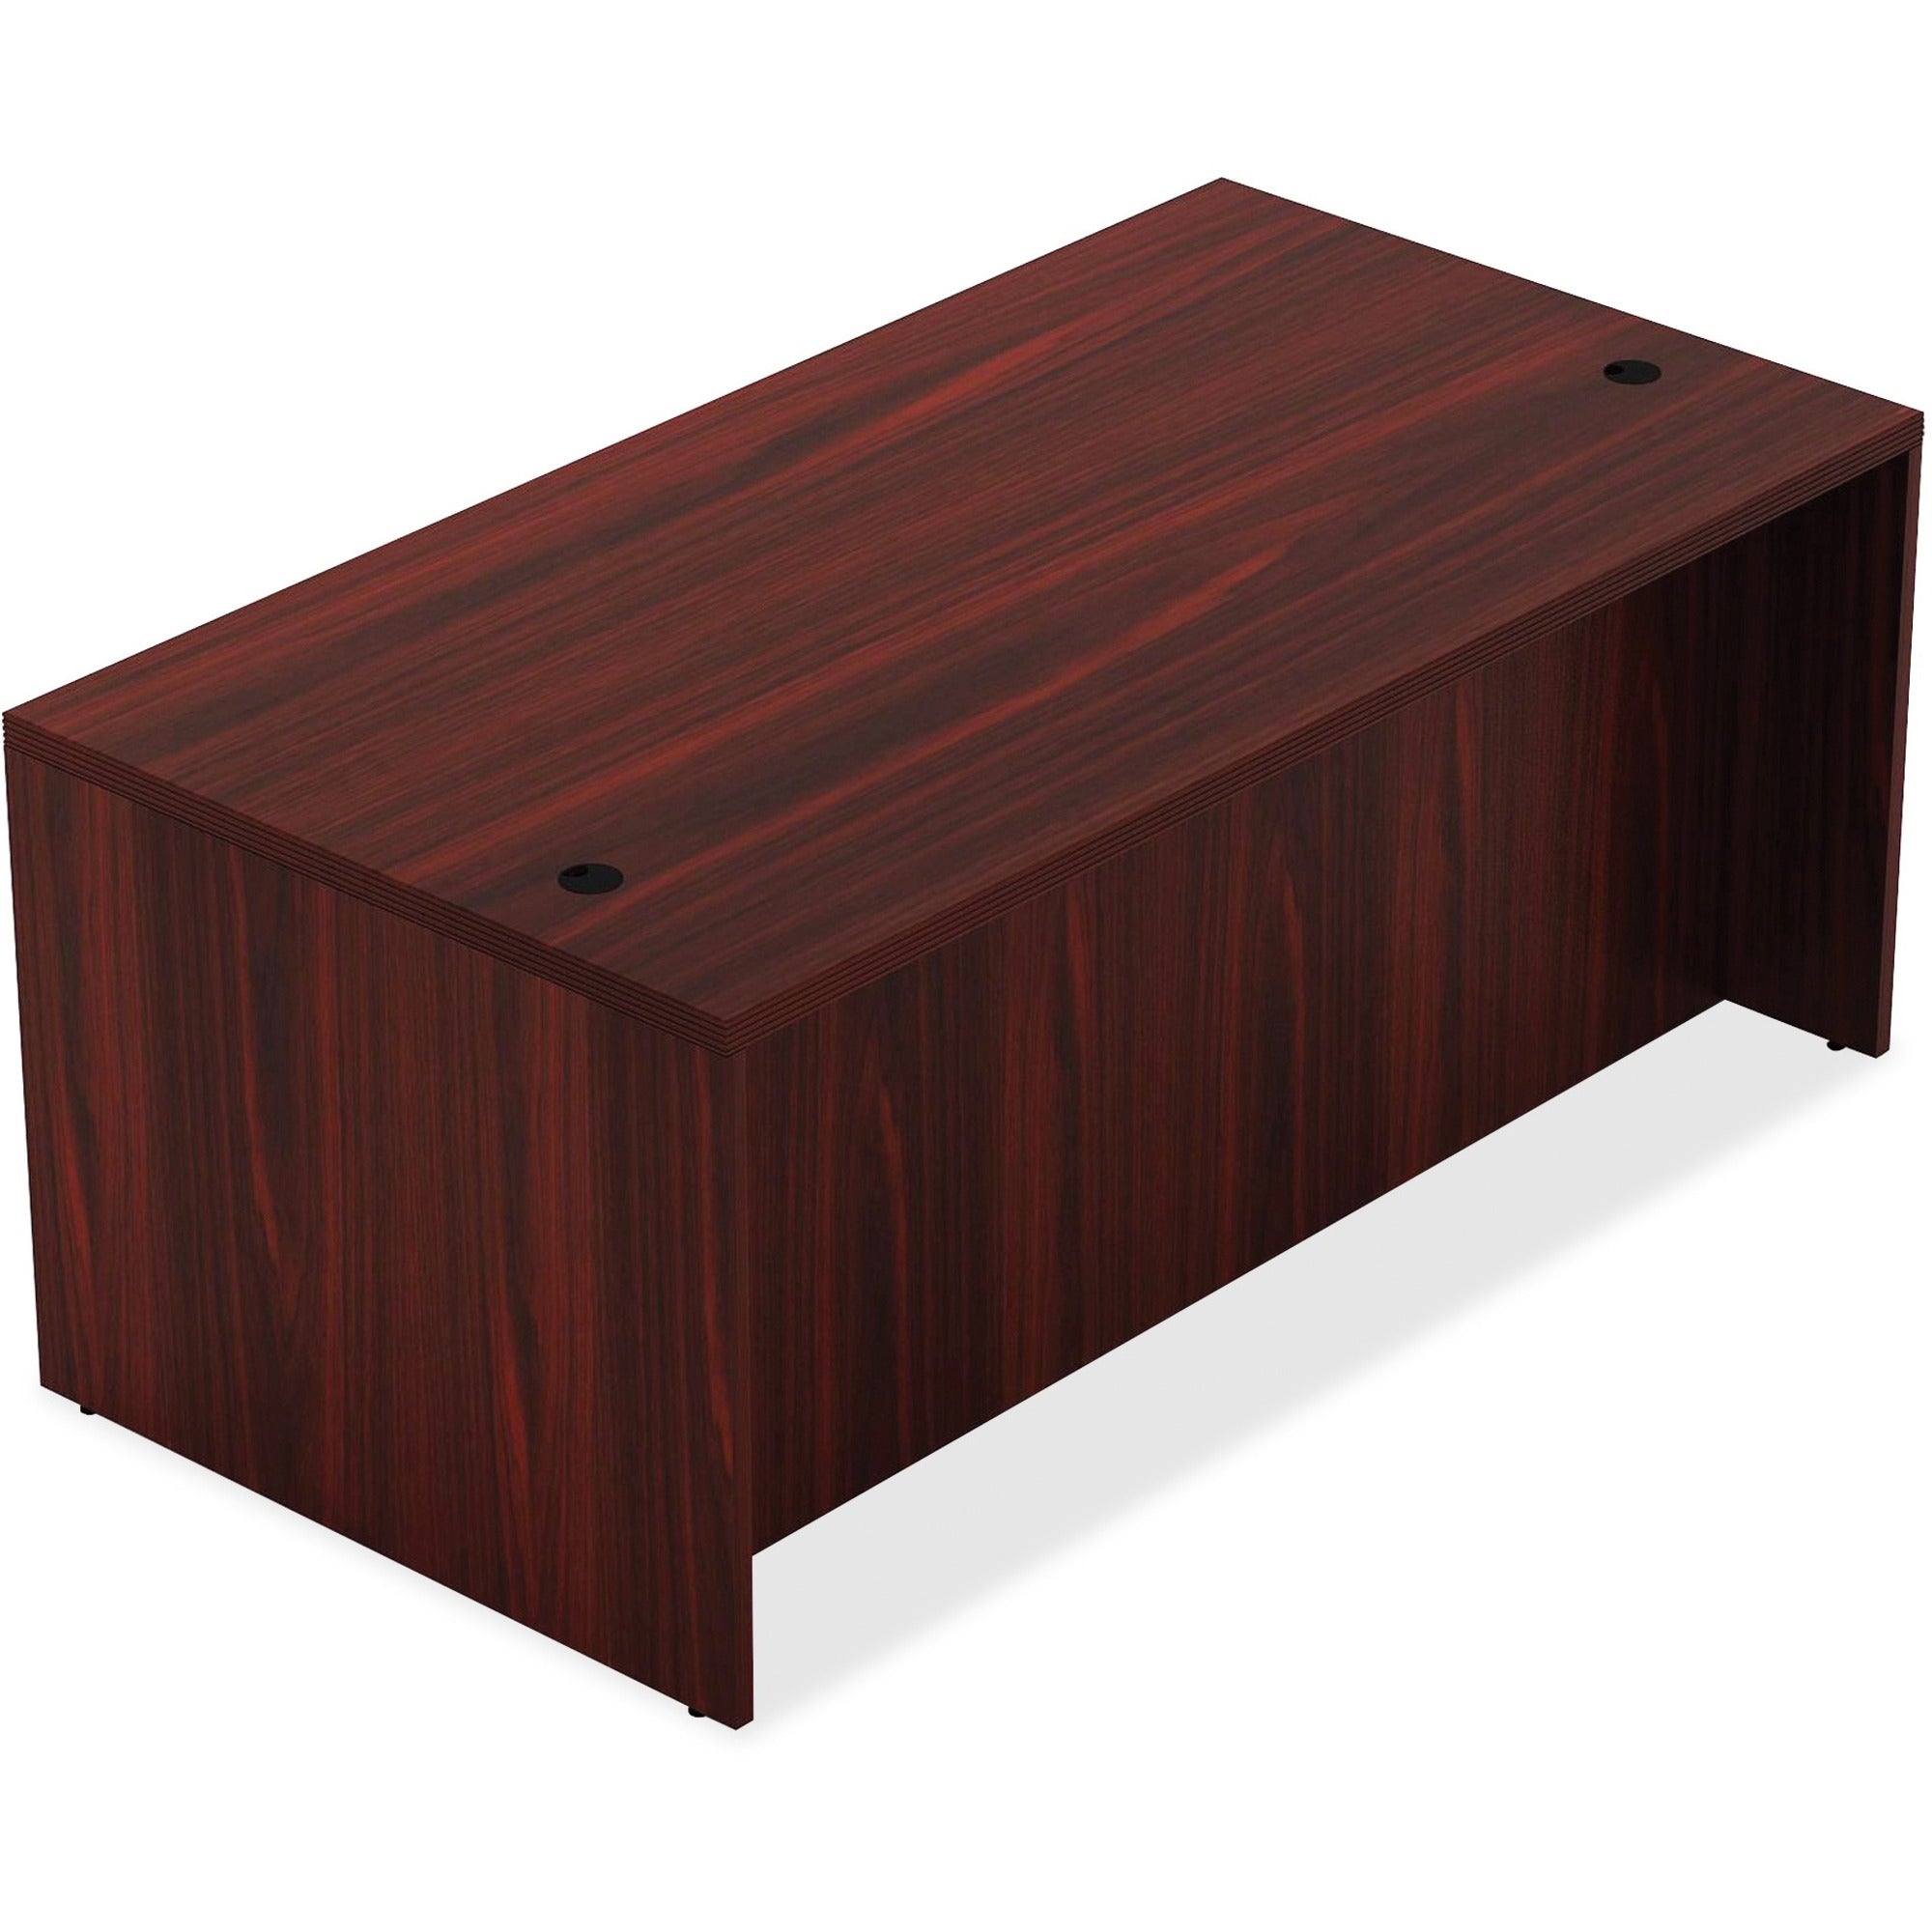 Lorell Chateau Series Rectangular desk - 59" x 29.5"30" Table, 1.5" Table Top - Reeded Edge - Material: P2 Particleboard - Finish: Mahogany Laminate - Durable, Modesty Panel, Grommet - For Office - 